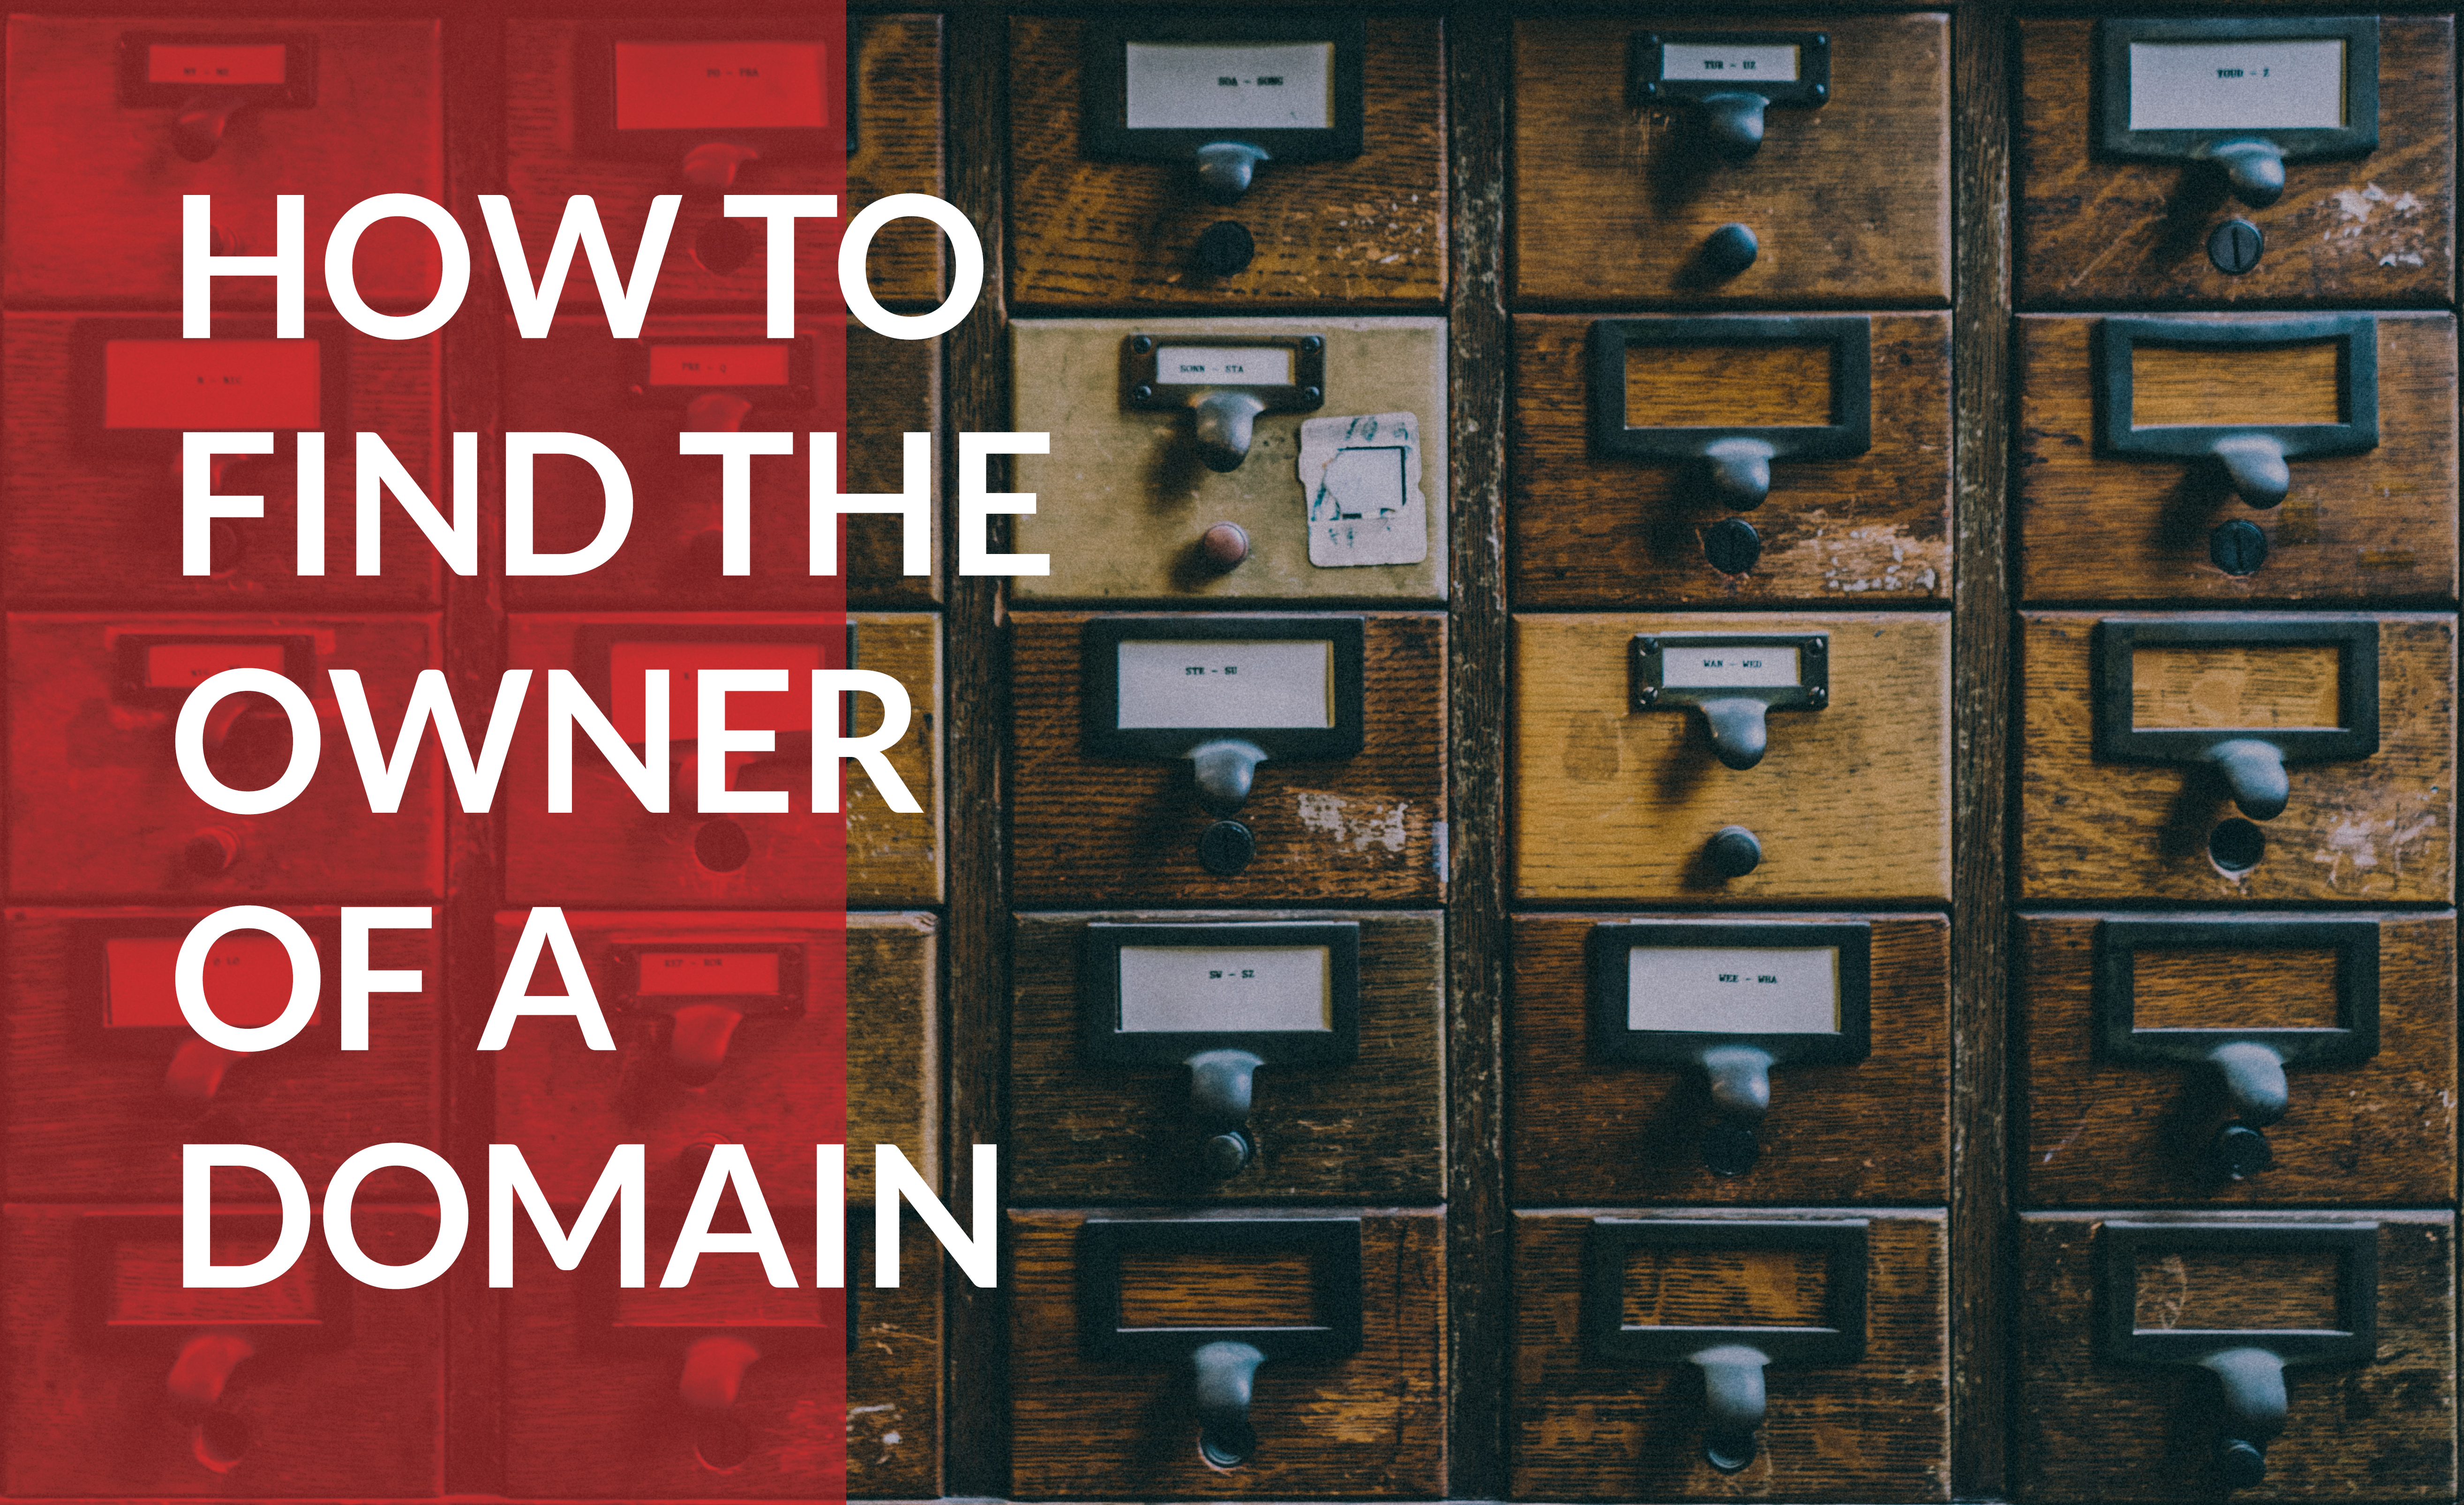 How to find the owner of a domain